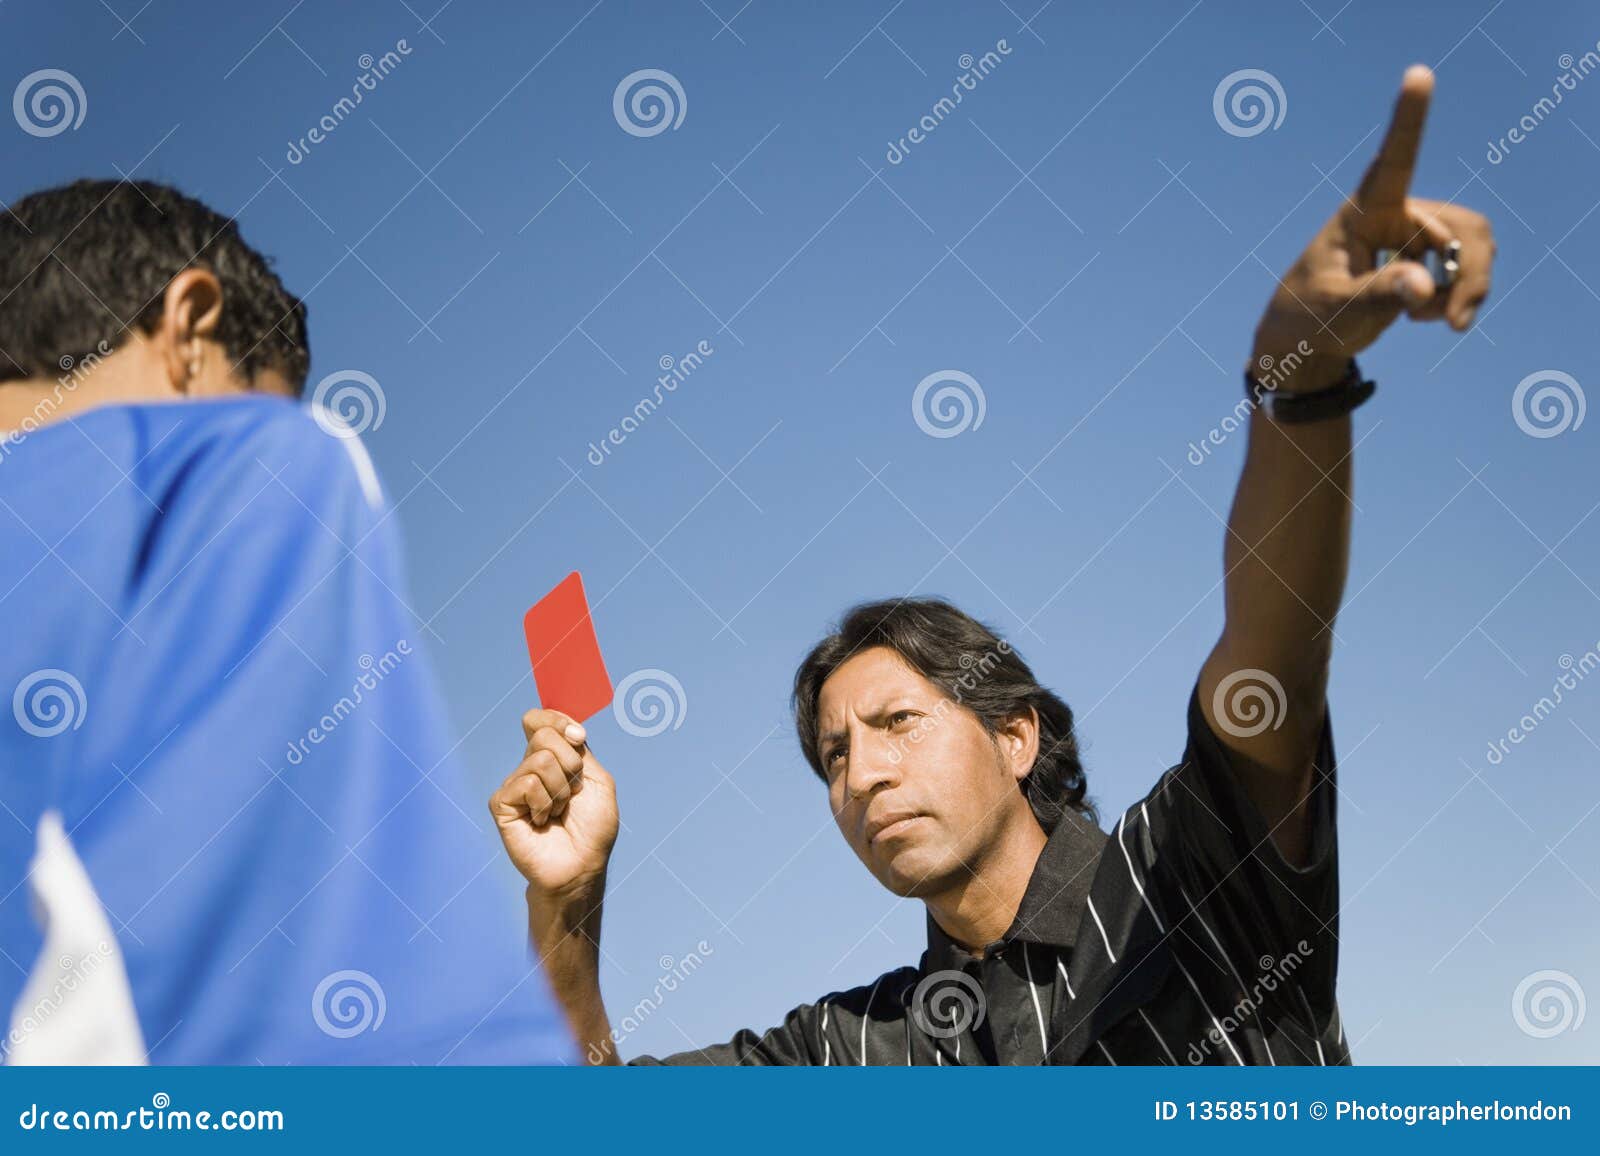 Stern referee showing red card Stock Photo by ©Wavebreakmedia 50051525